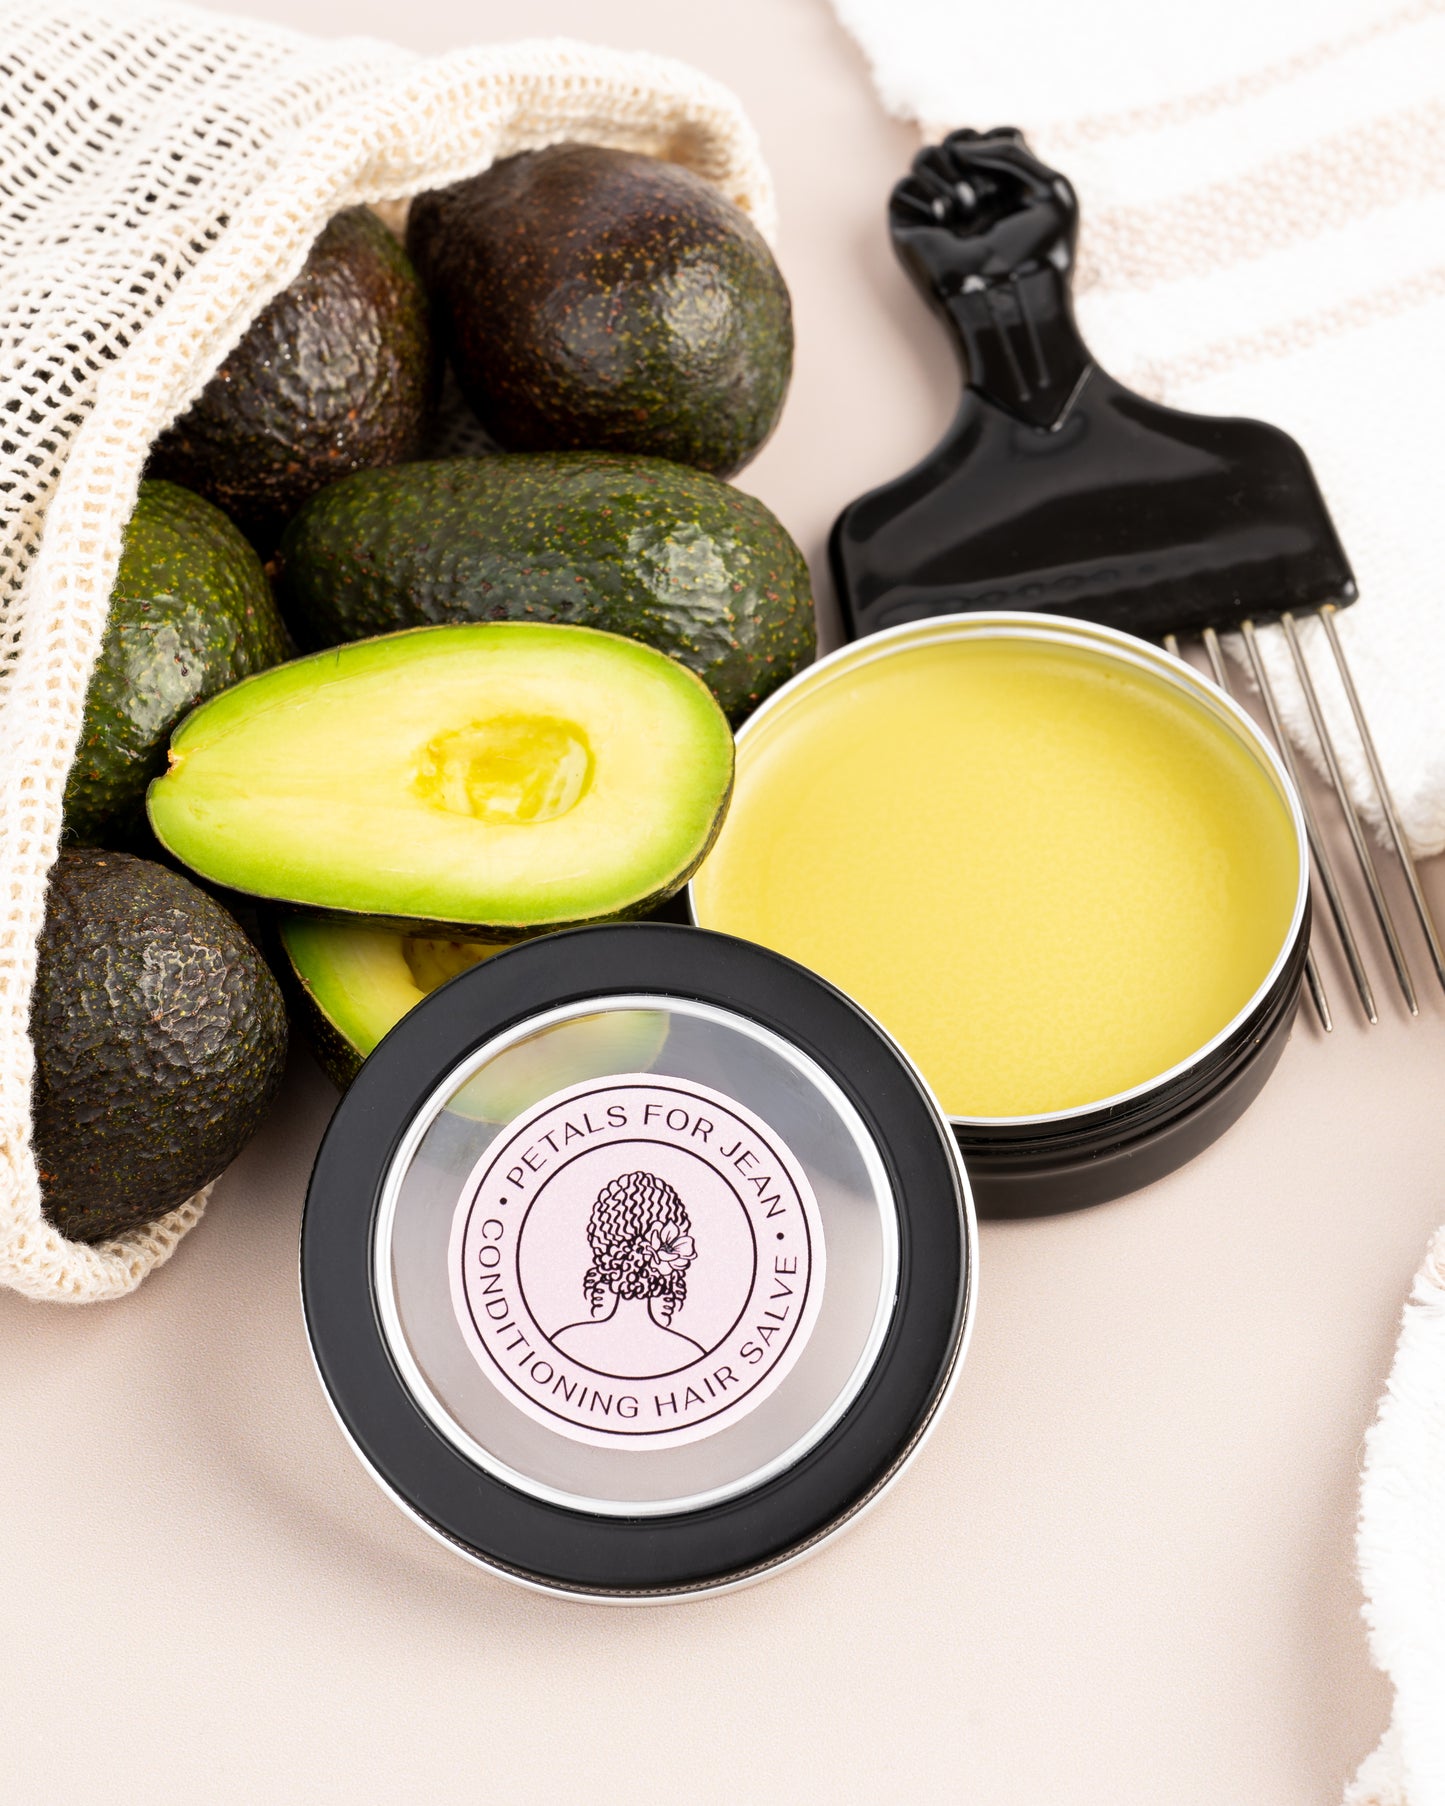 Fragrance Free Conditioning Hair Salve